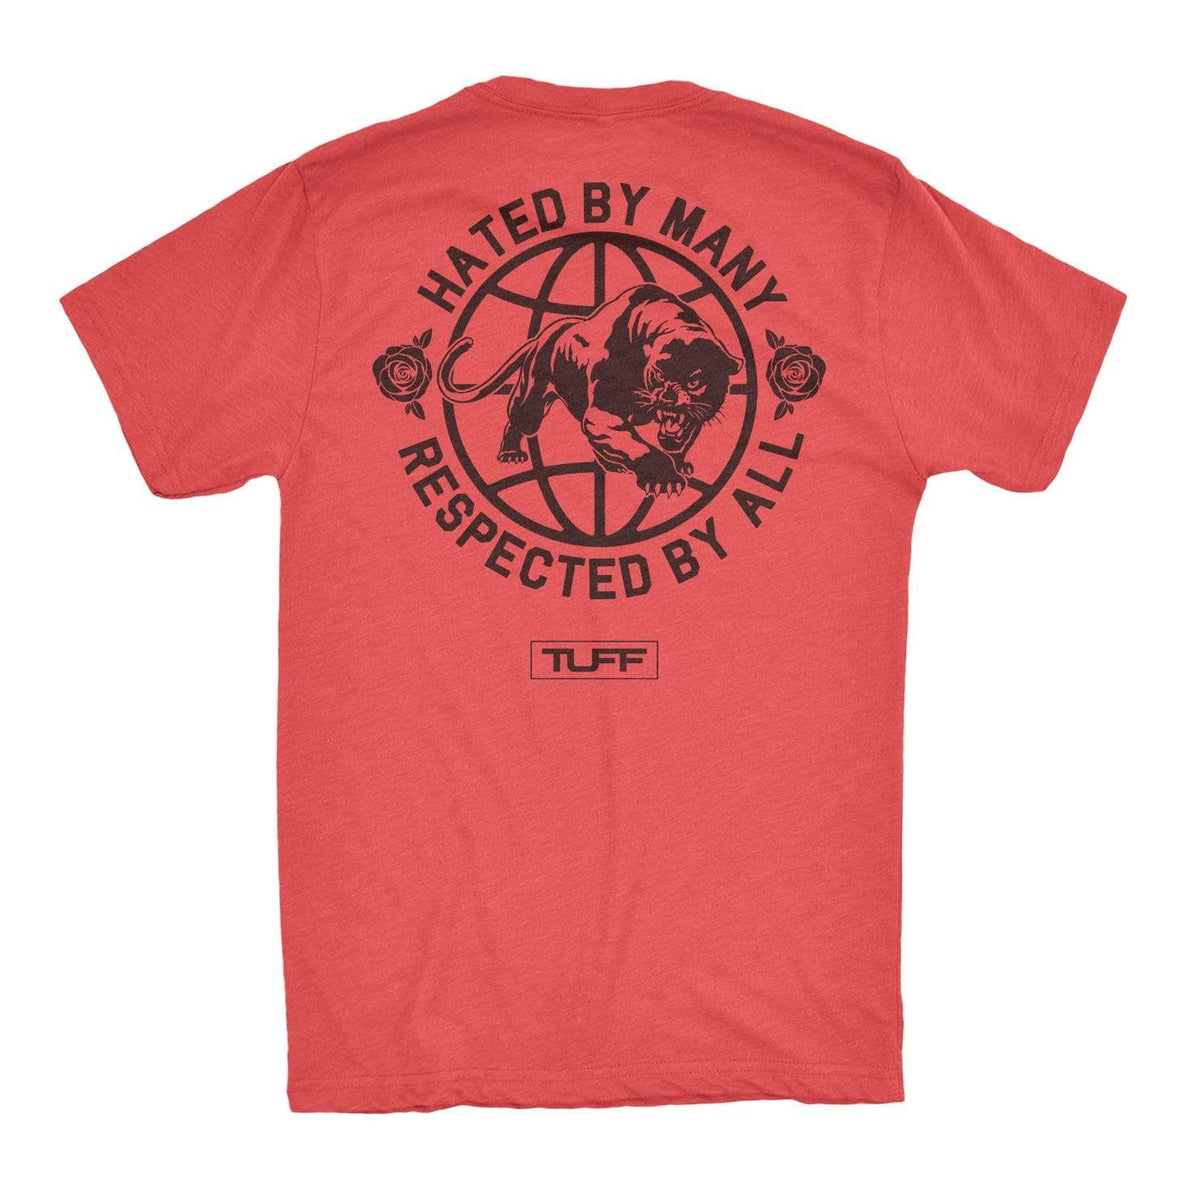 Hated By Many, Respected By All Tee S / Vintage Red TuffWraps.com